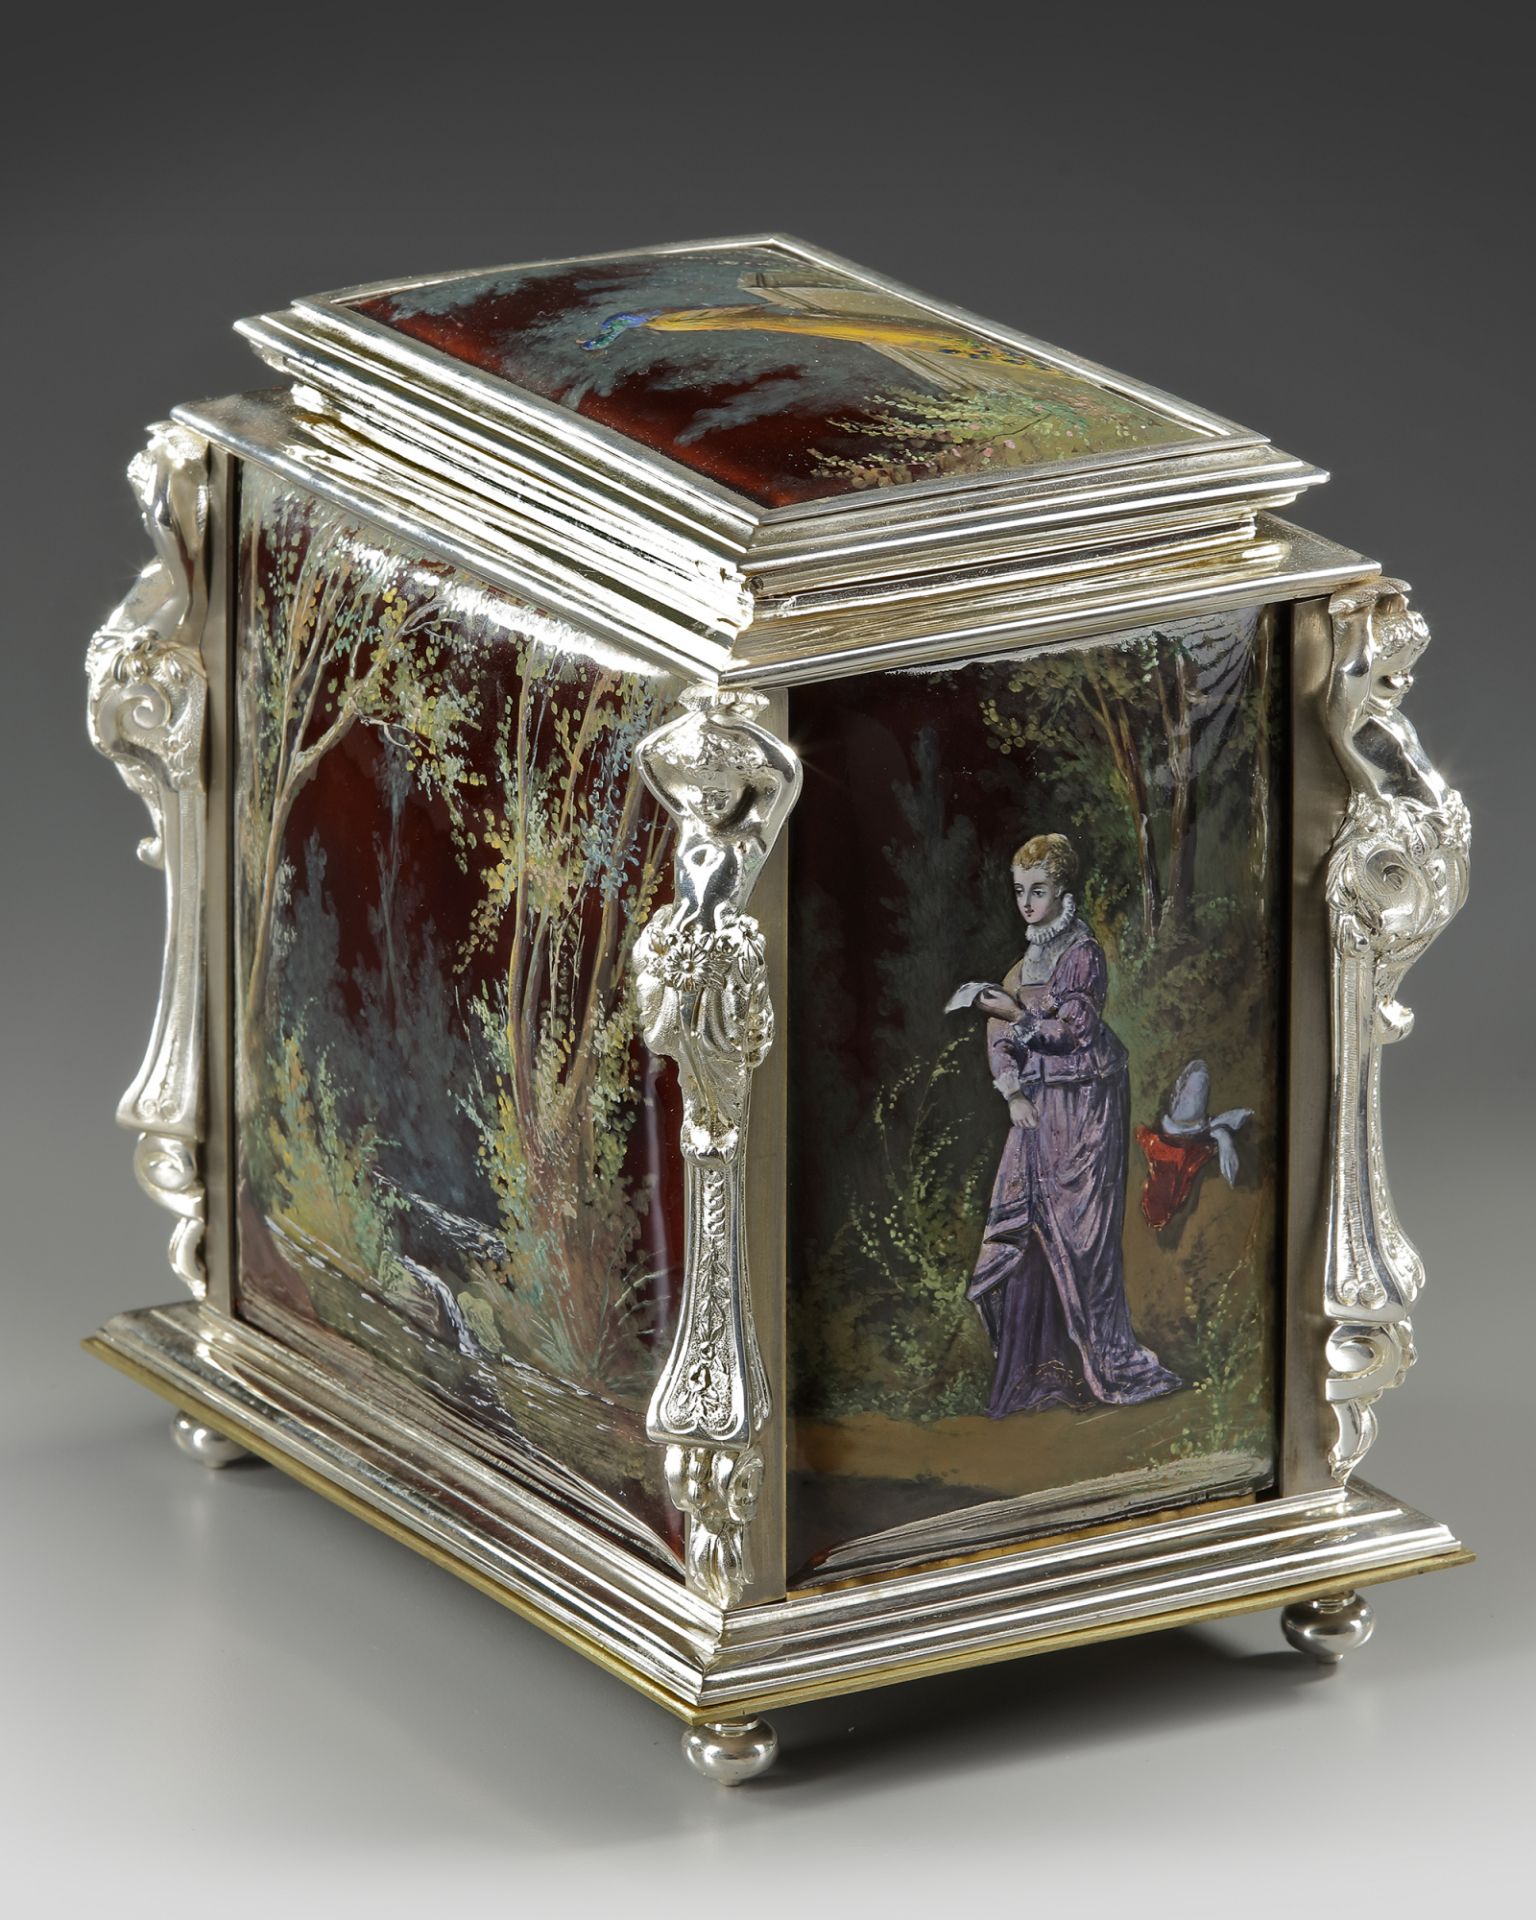 A JEWELRY BOX, FRANCE, LATE 19TH CENTURY - Image 2 of 5